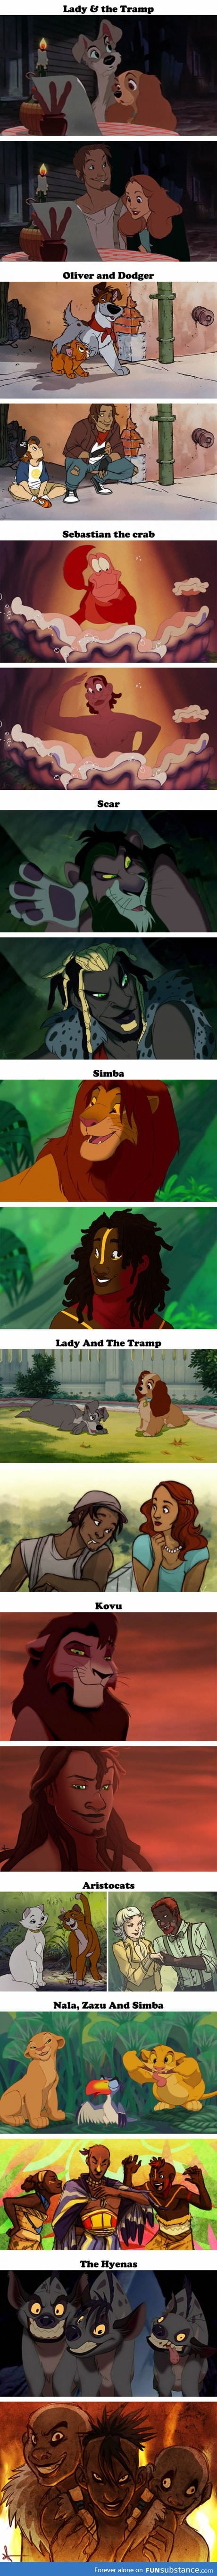 Famous Disney characters as ethnically correct humans